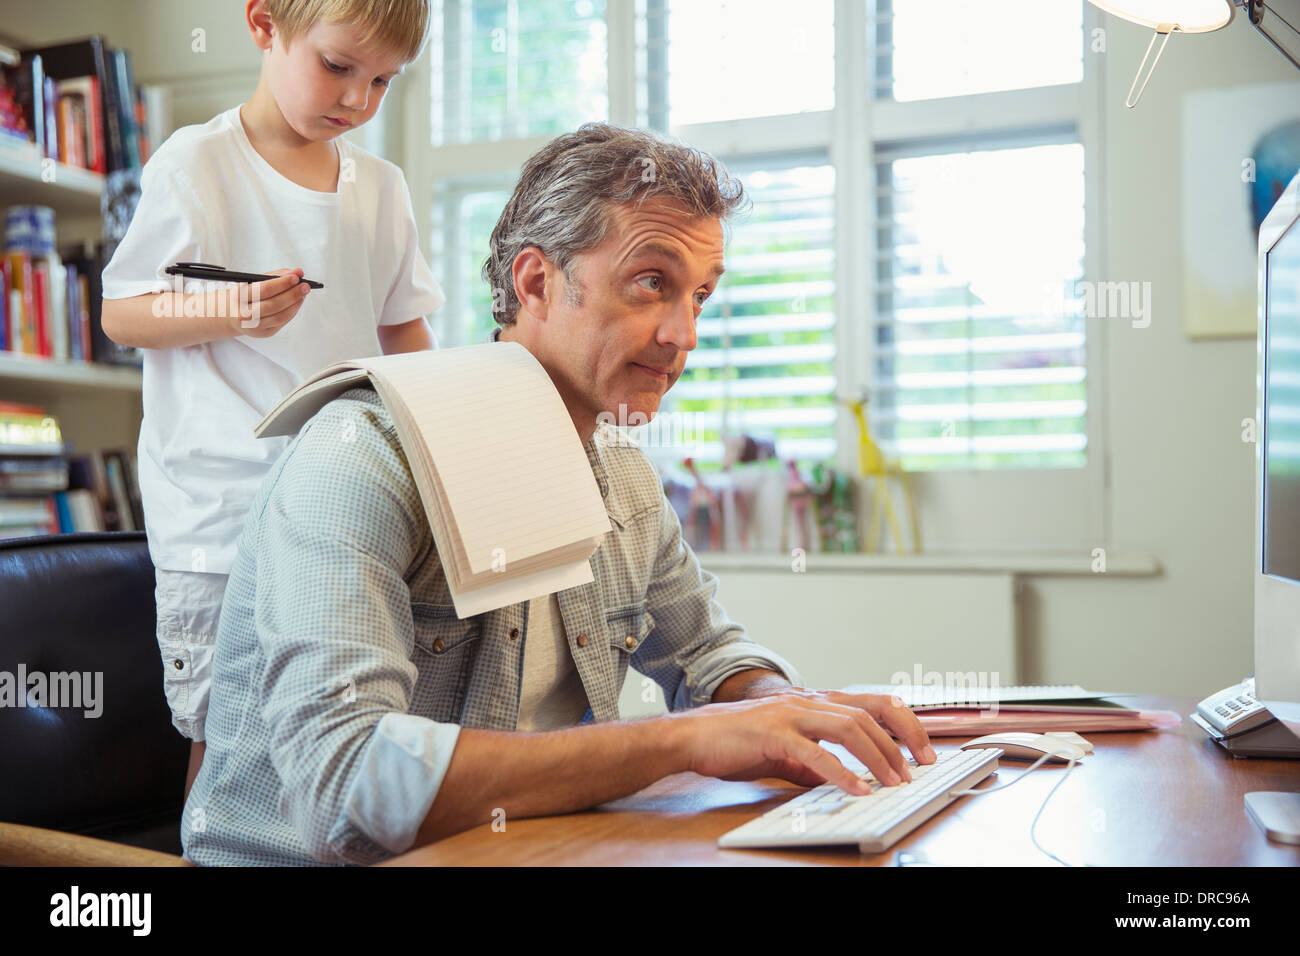 Son distracting father at work in home office Stock Photo